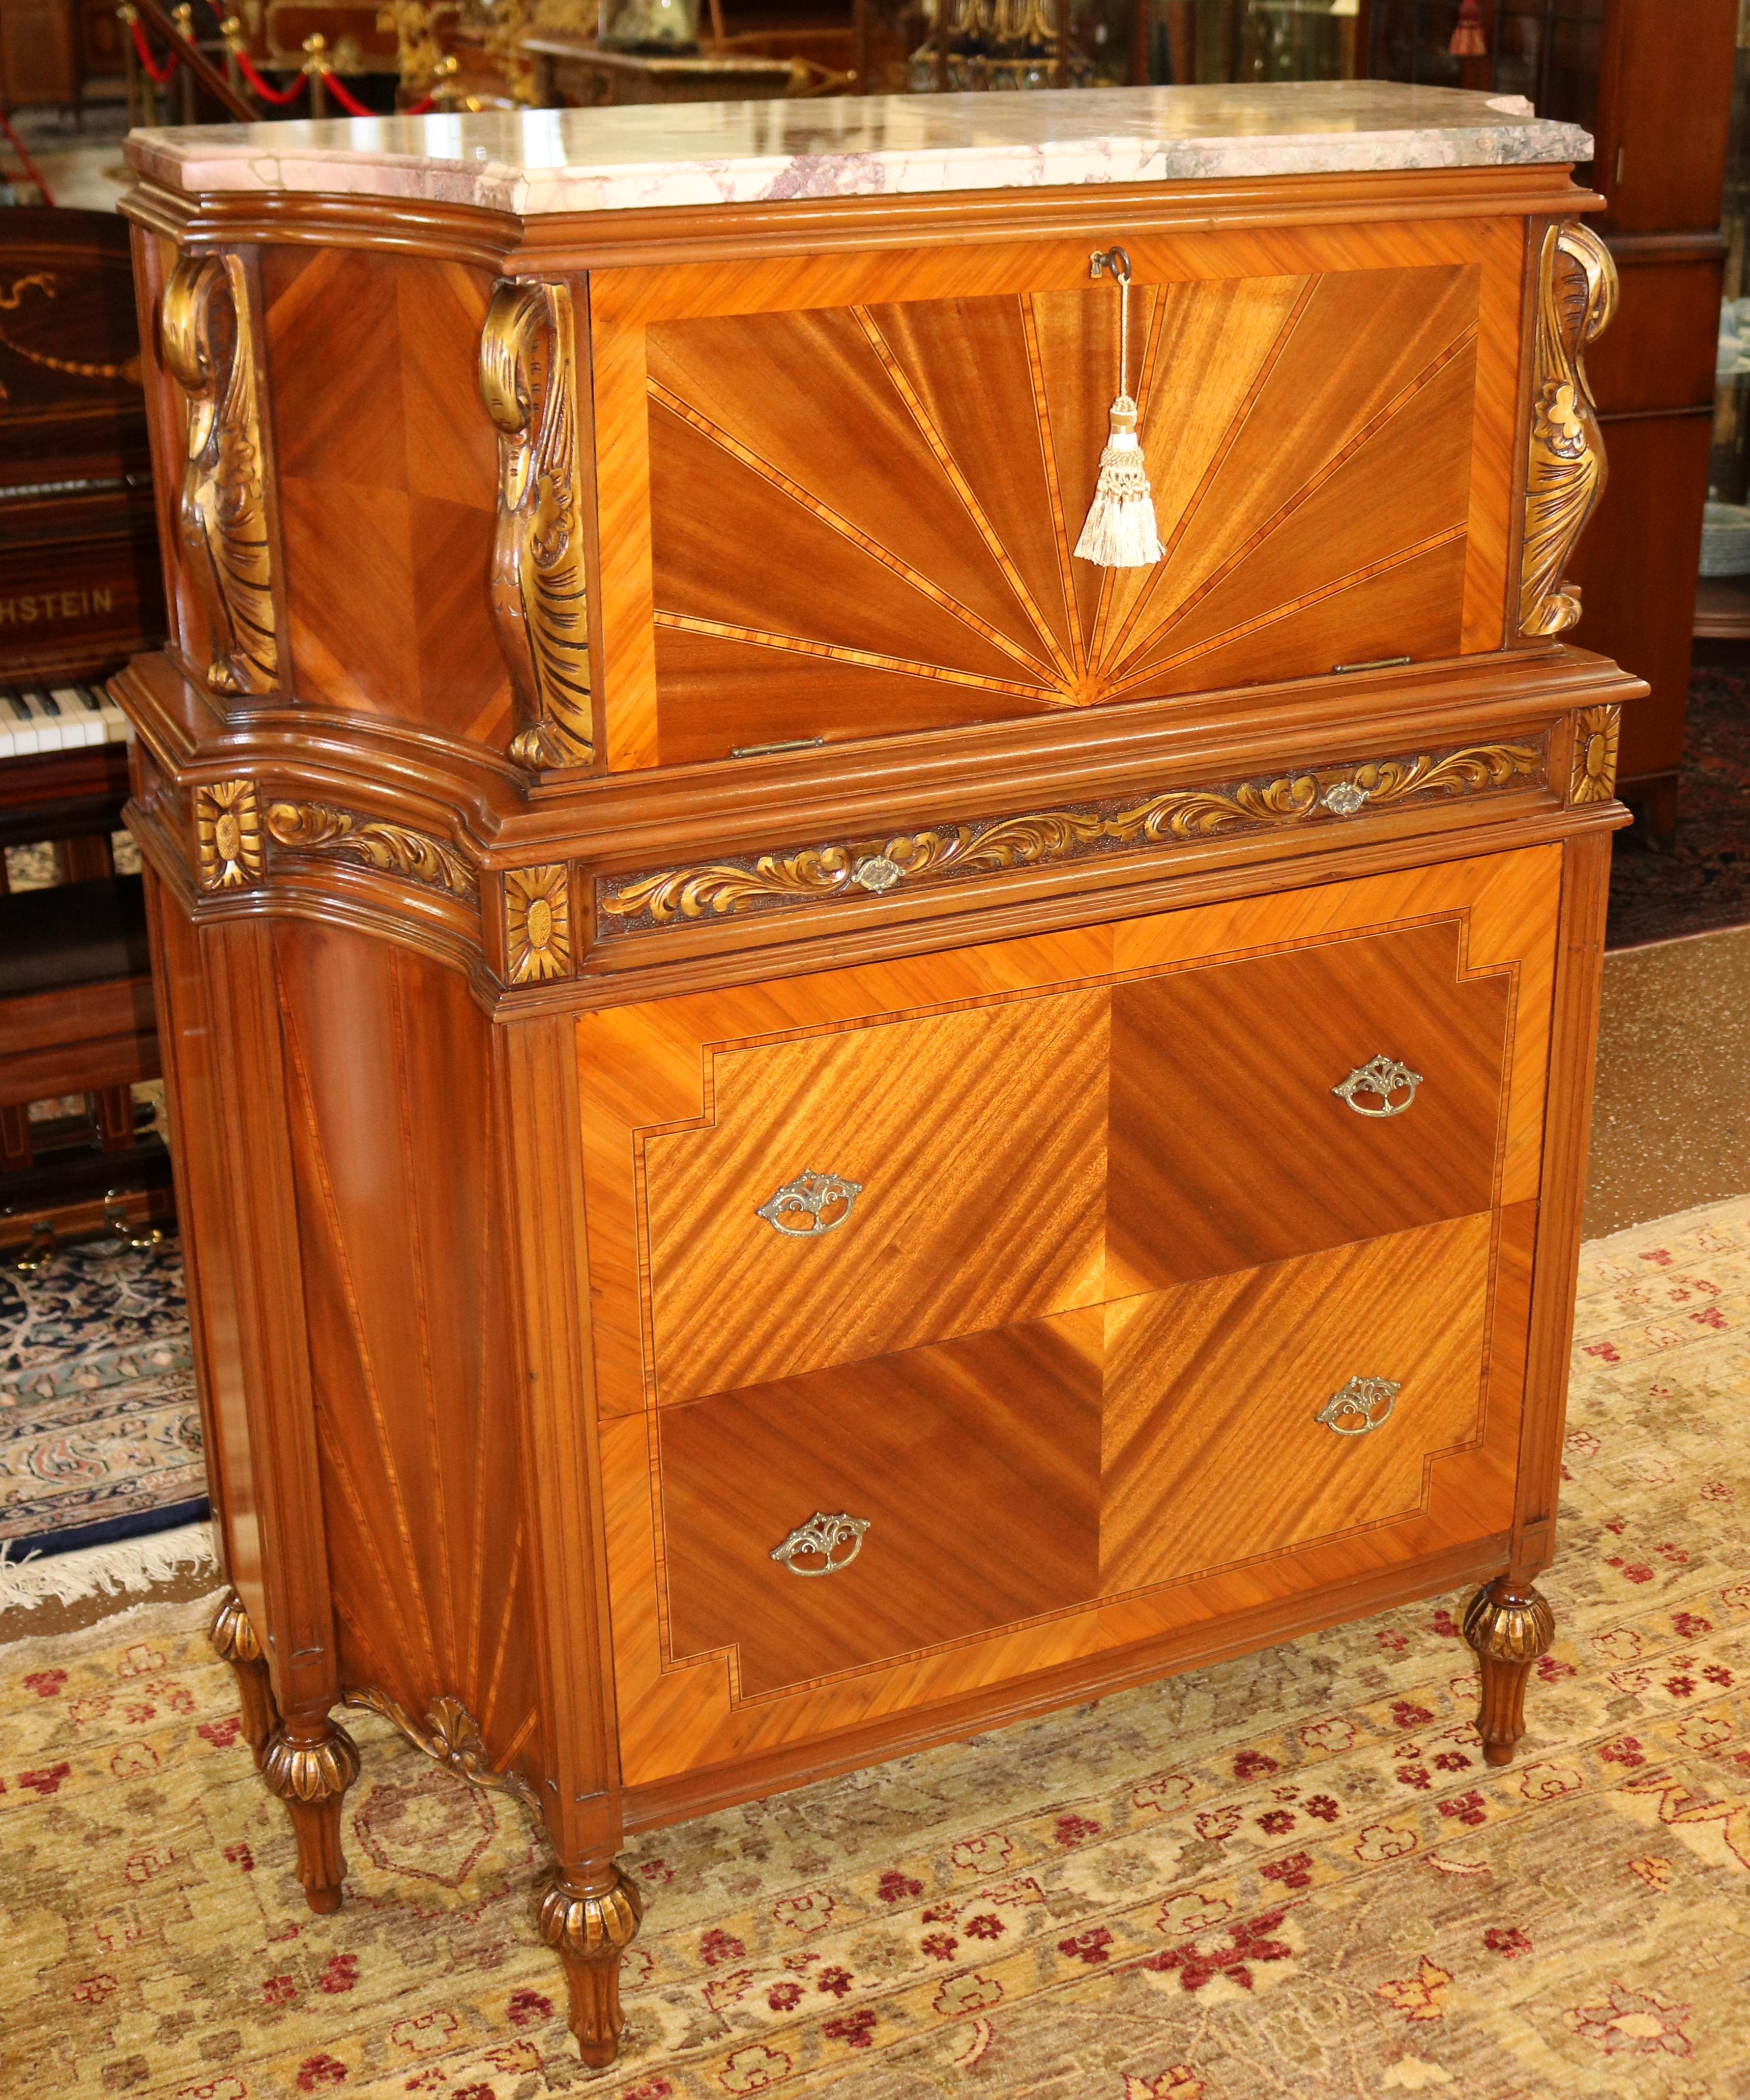 French Louis XVI Style Marble Top Carved Swan Kingwood Dresser High Chest C 1920

Dimensions : 44